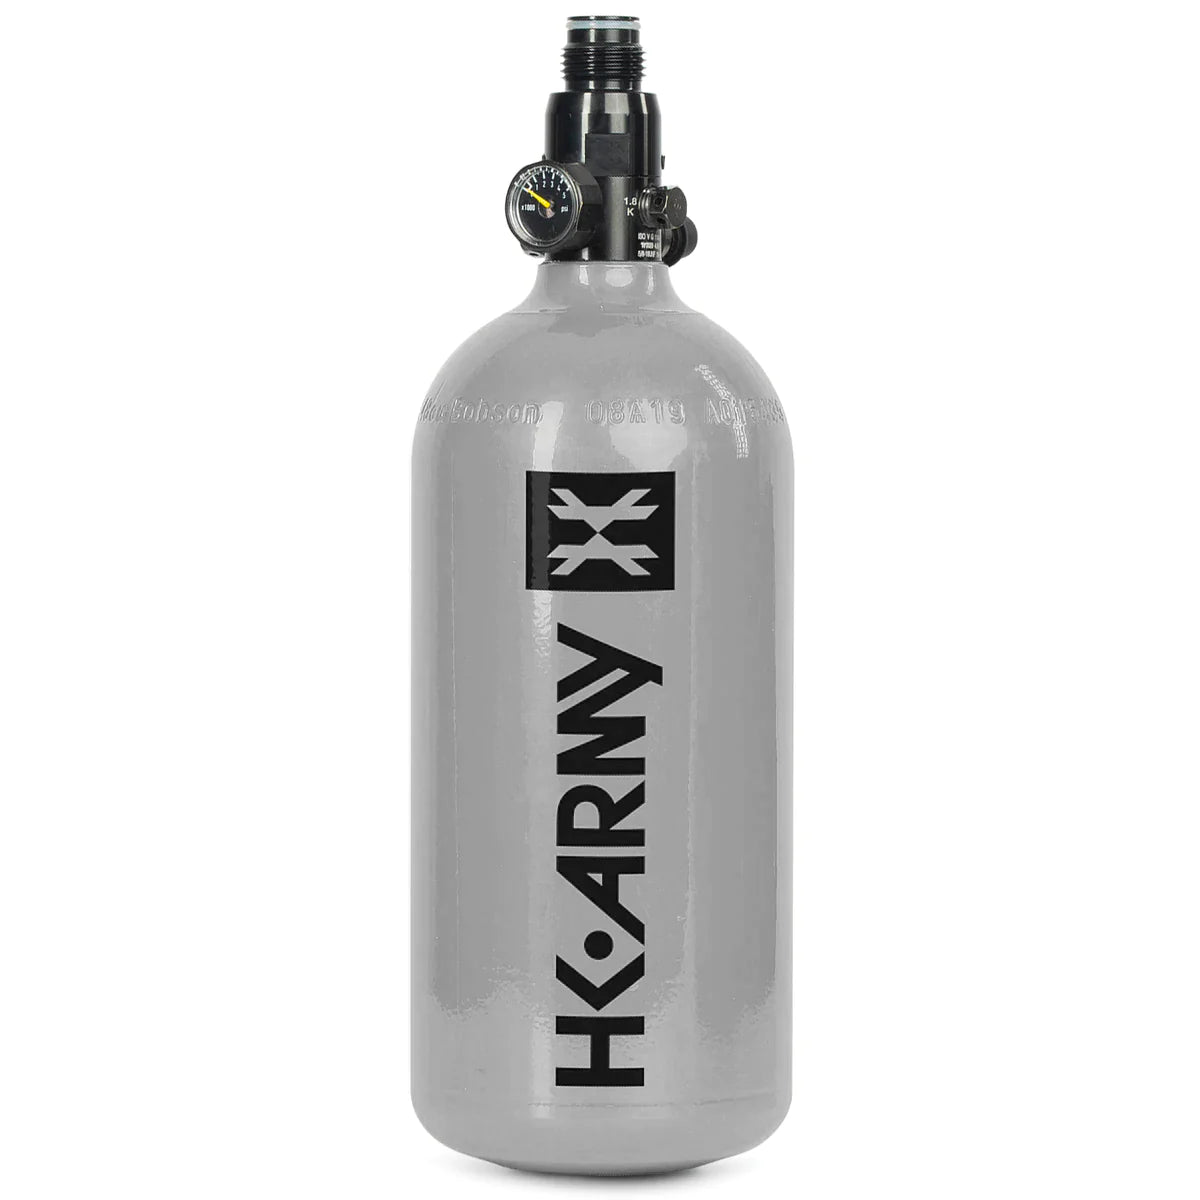 48ci / 3000psi -  Paintball Compressed Air Tank - Grey | HK Army